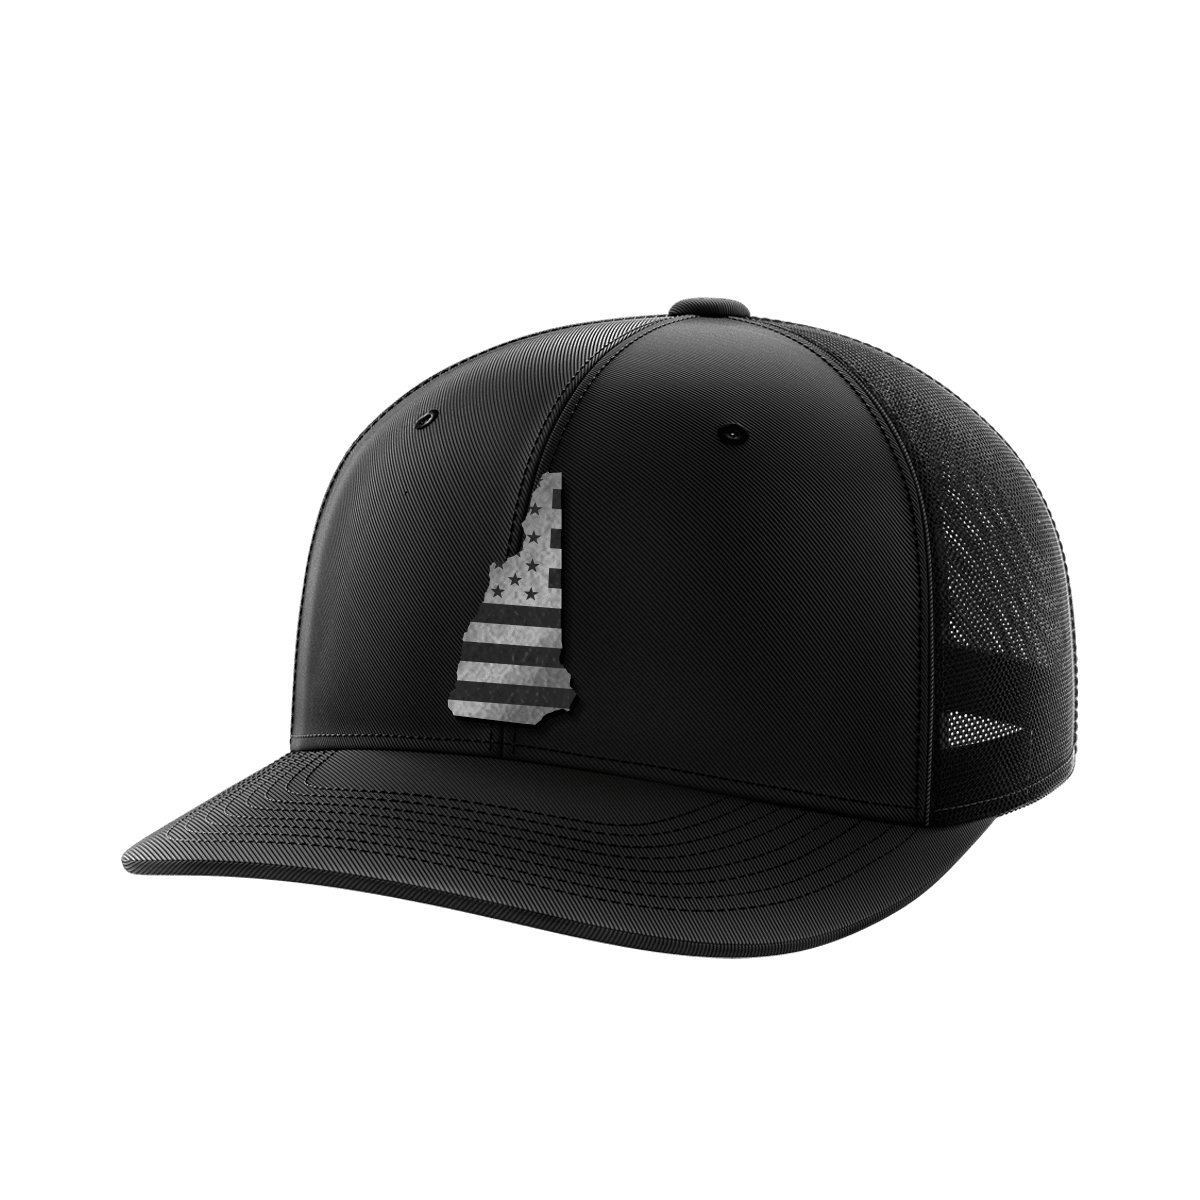 New Hampshire United Collection (black leather) - Greater Half